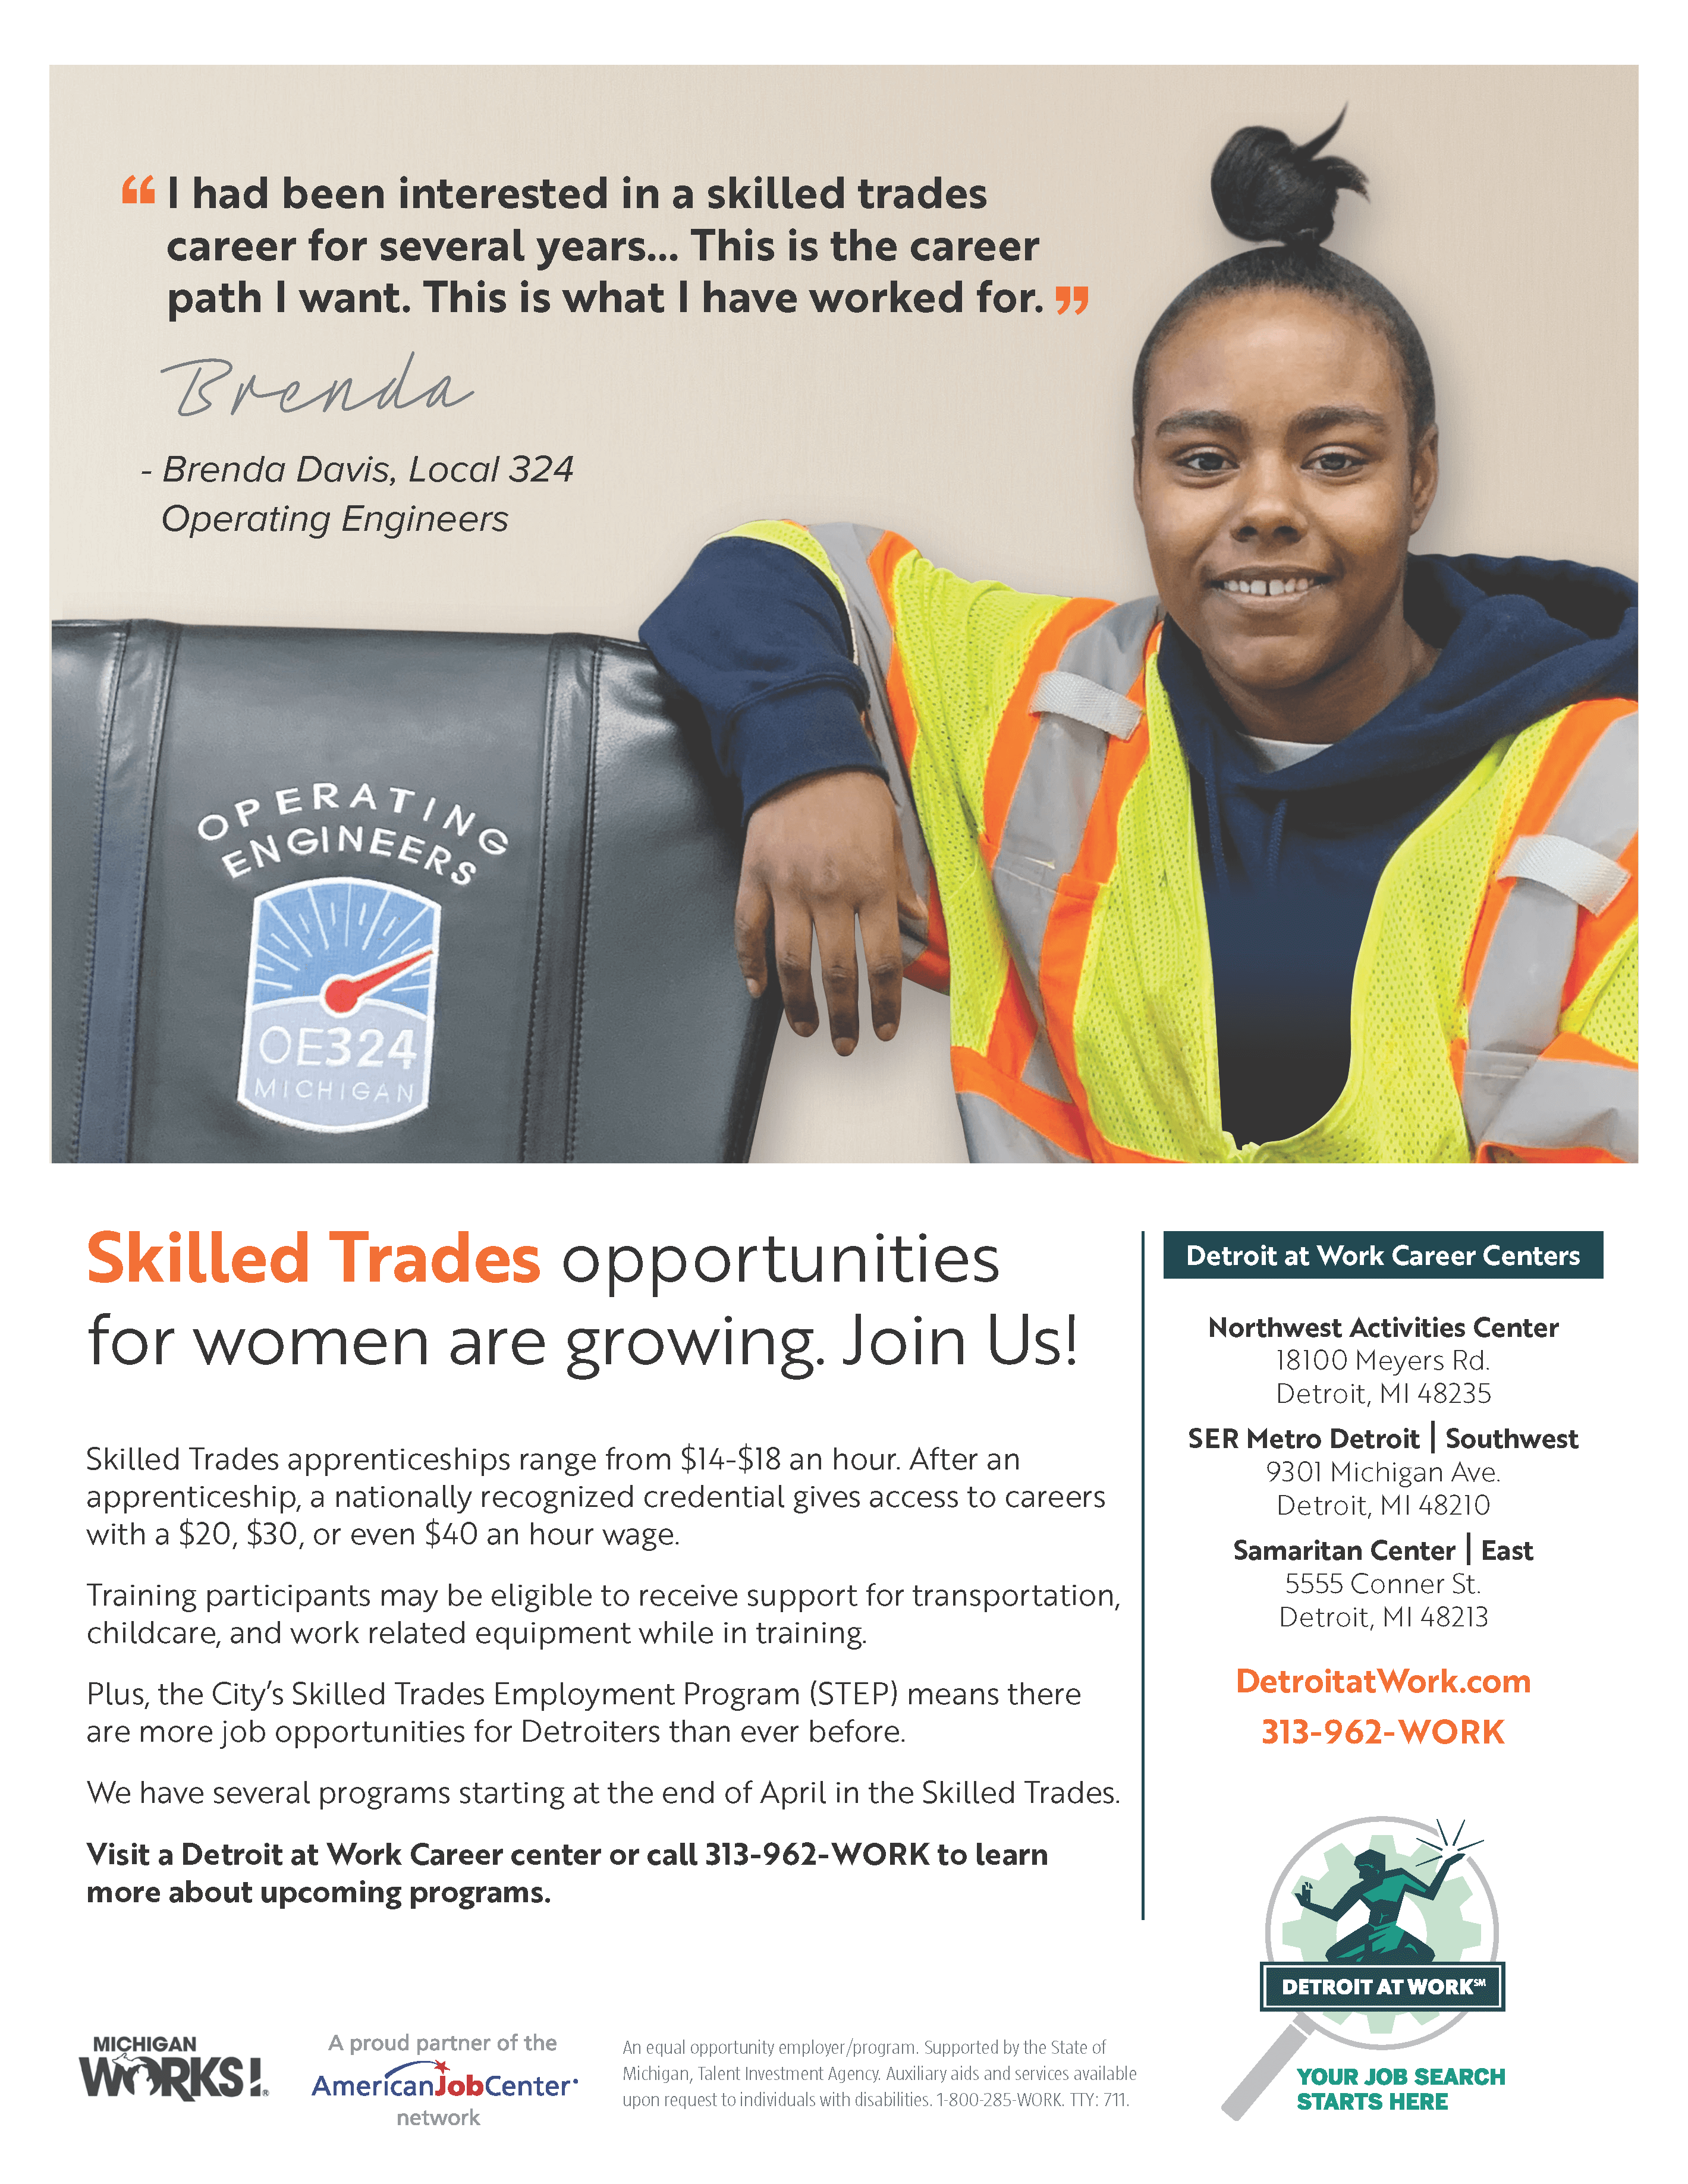 Women in Skilled Trades